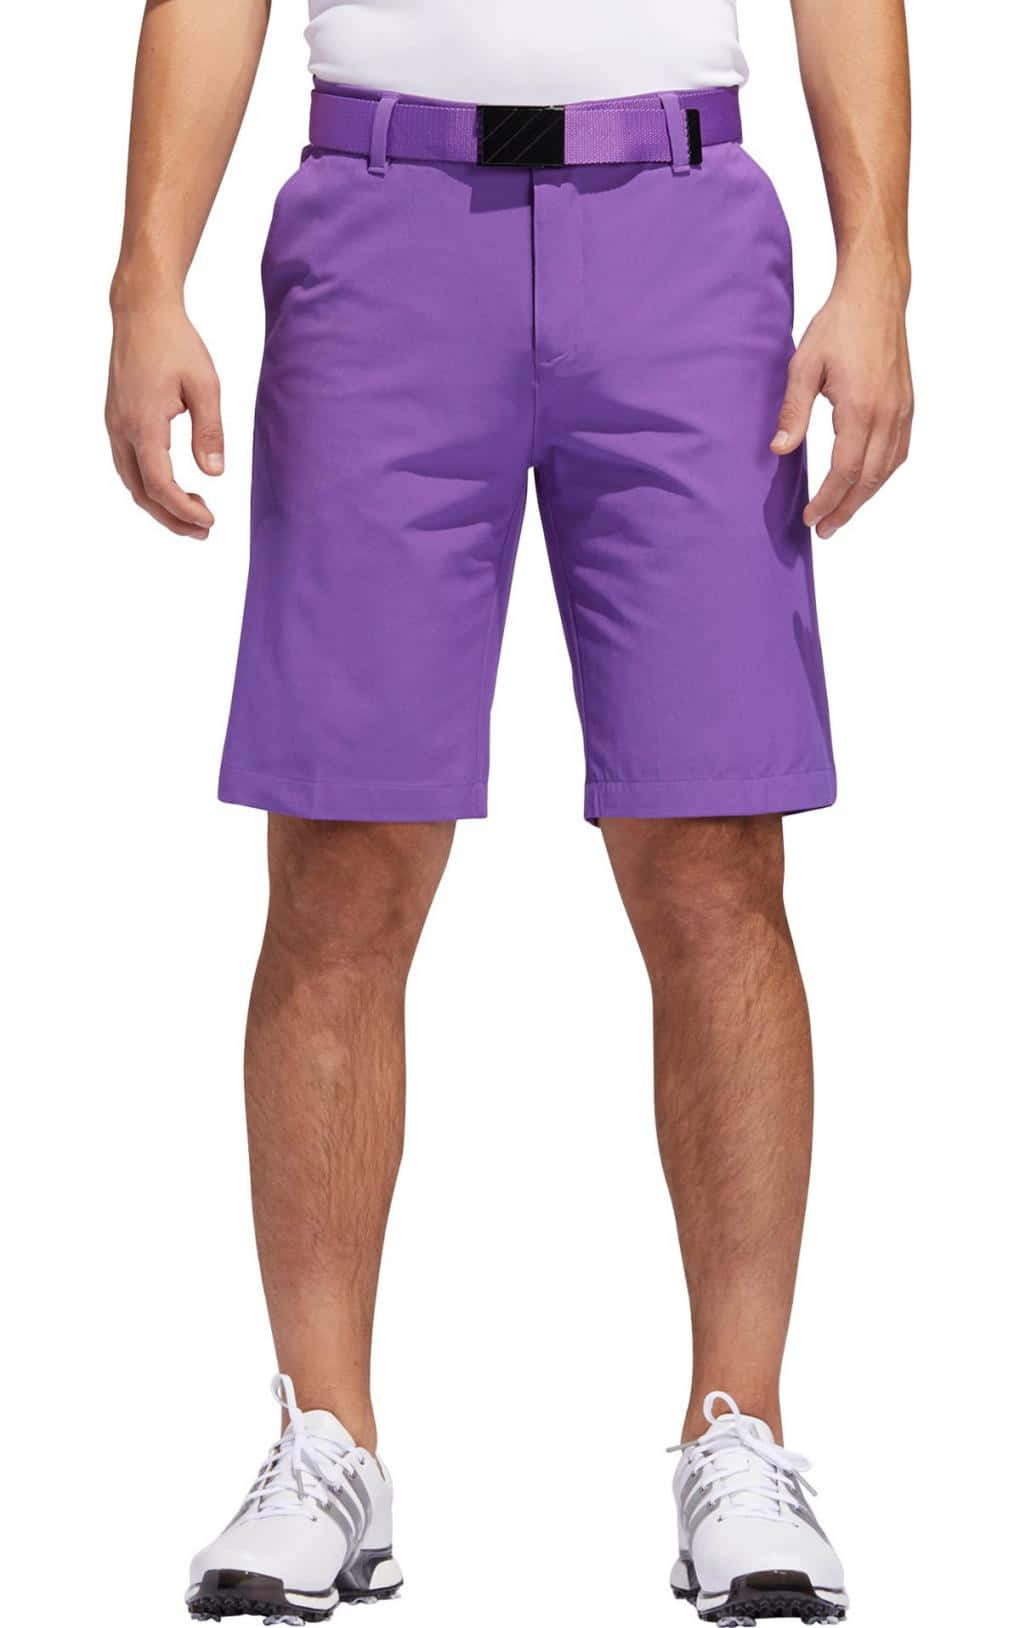 Walk with Confidence in Bold Purple Shorts Wallpaper